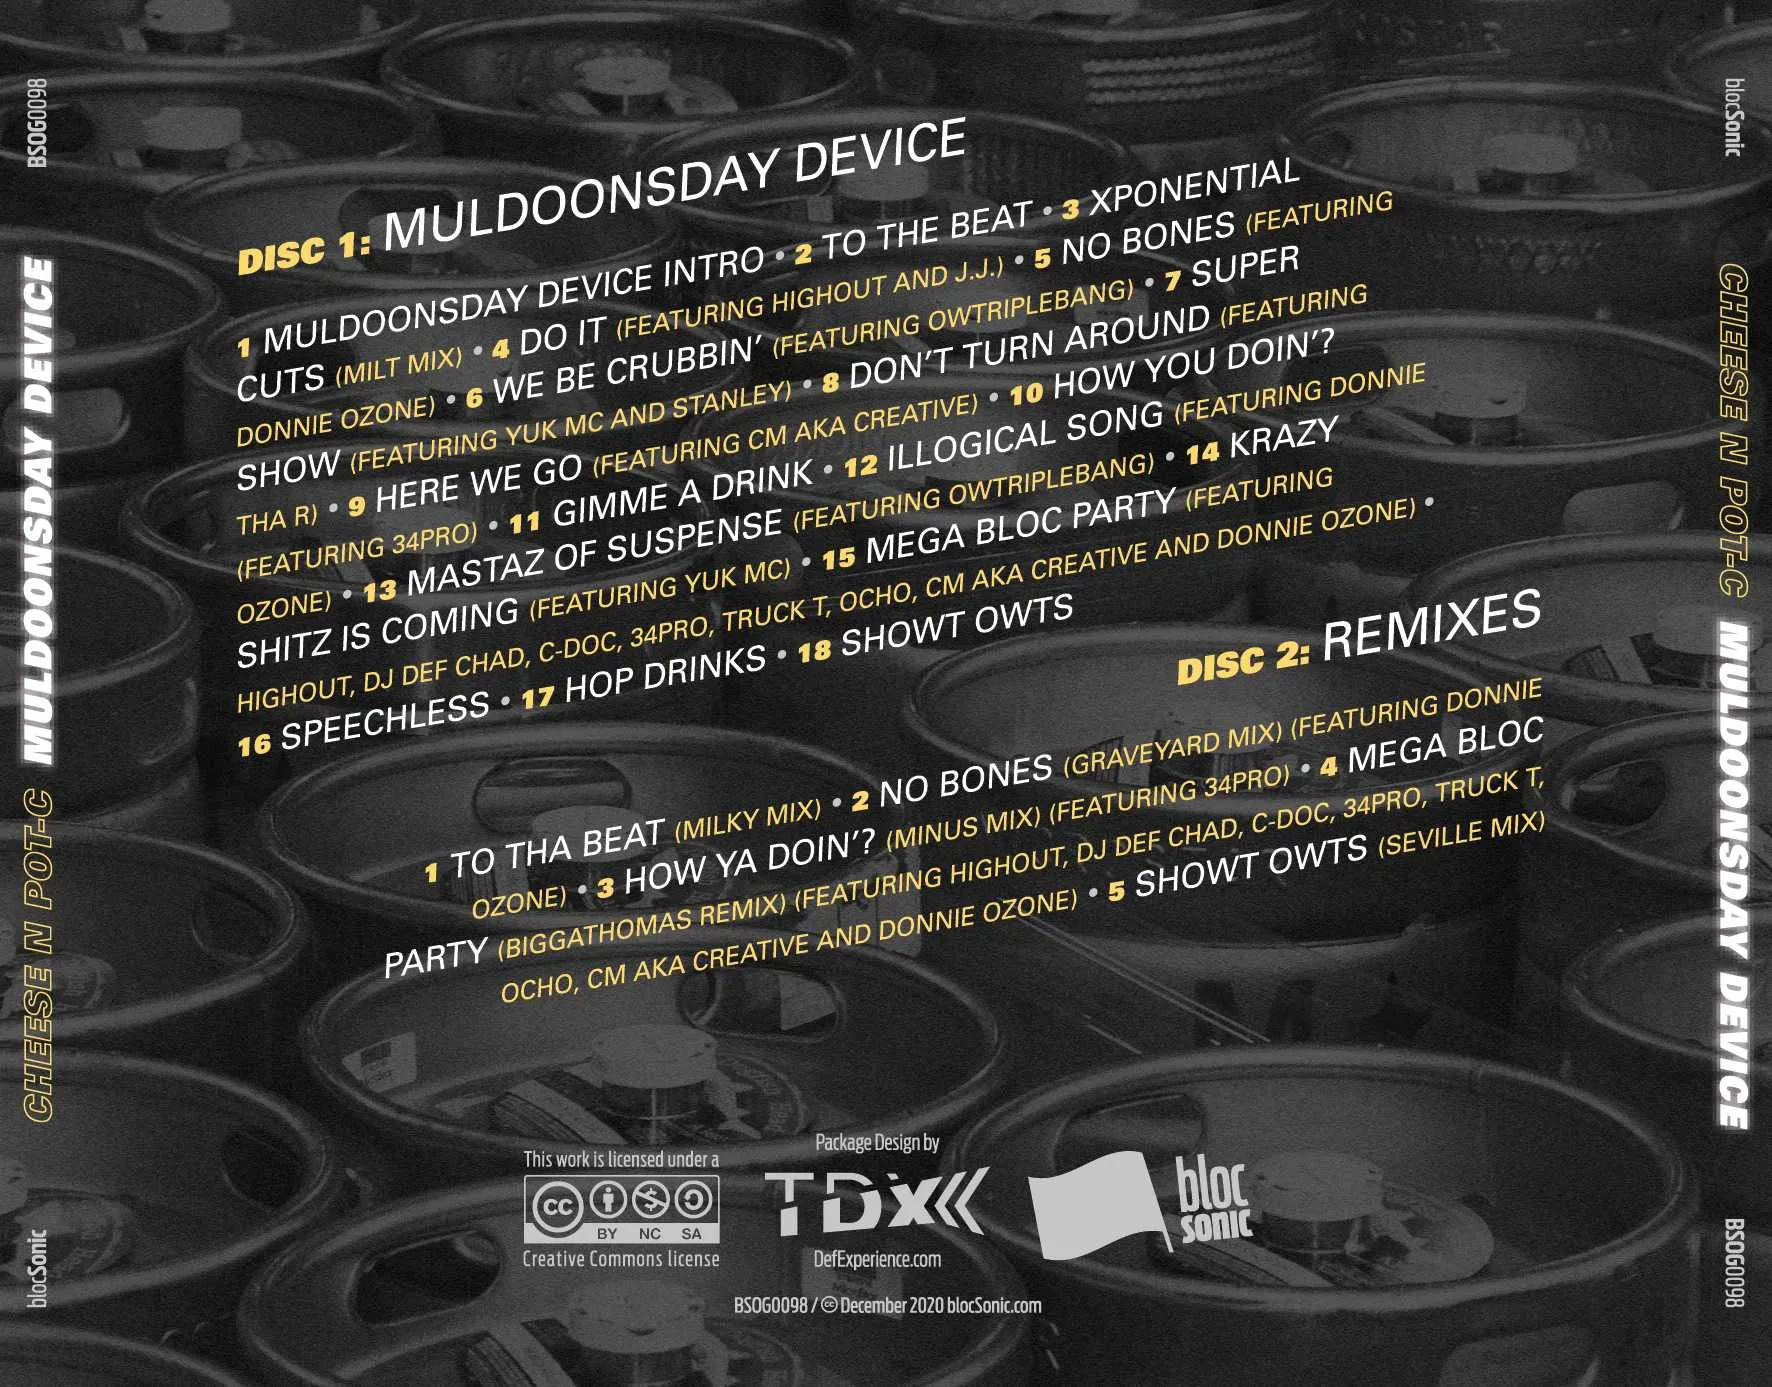 Album traycard for “Muldoonsday Device” by Cheese N Pot-C